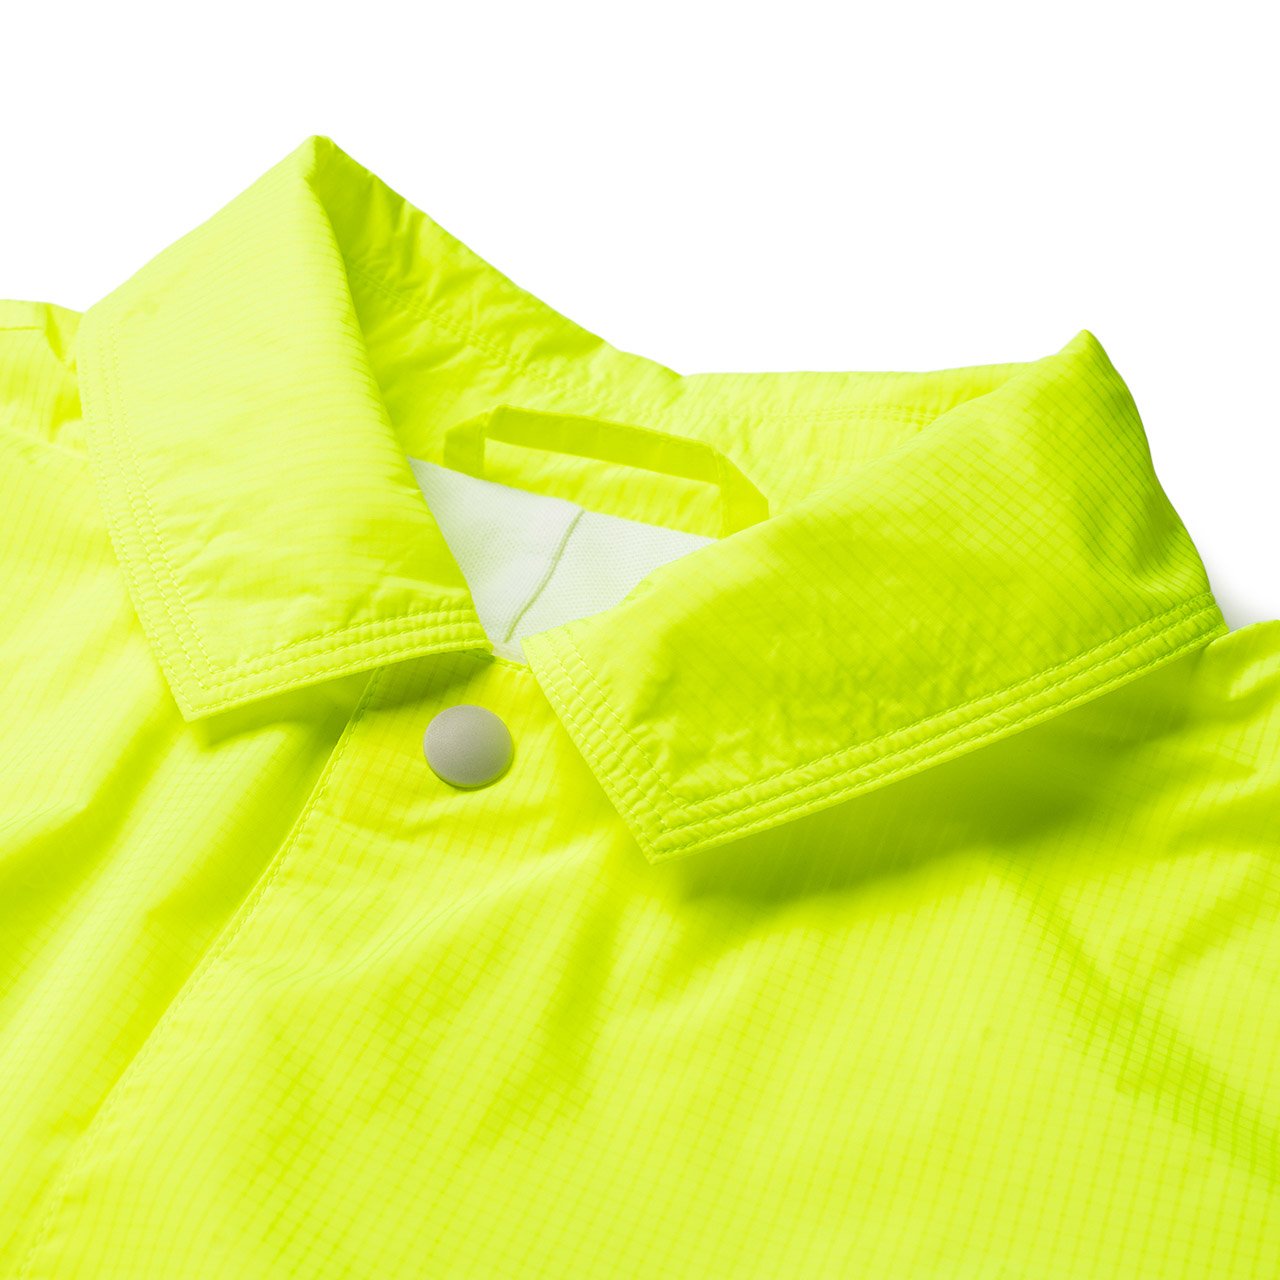 perks and mini alien morphosis coach jacket (neon yelllow) - 39069-fy - a.plus - Image - 3